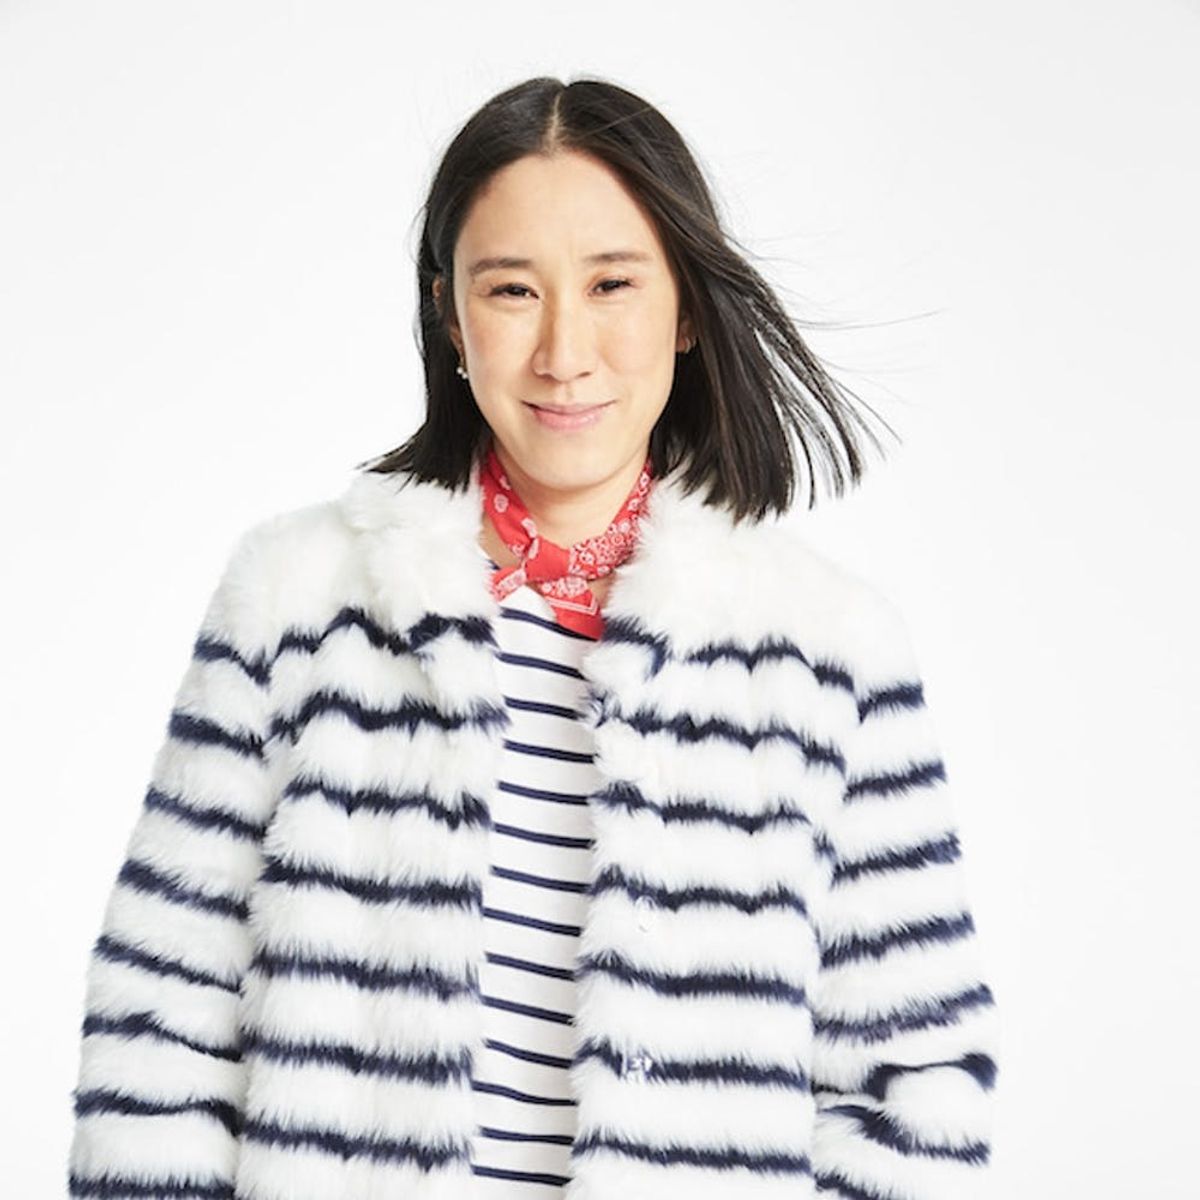 Insta Icon Eva Chen Dishes on Her Career, Fashion, and Her Latest Dream Collabs